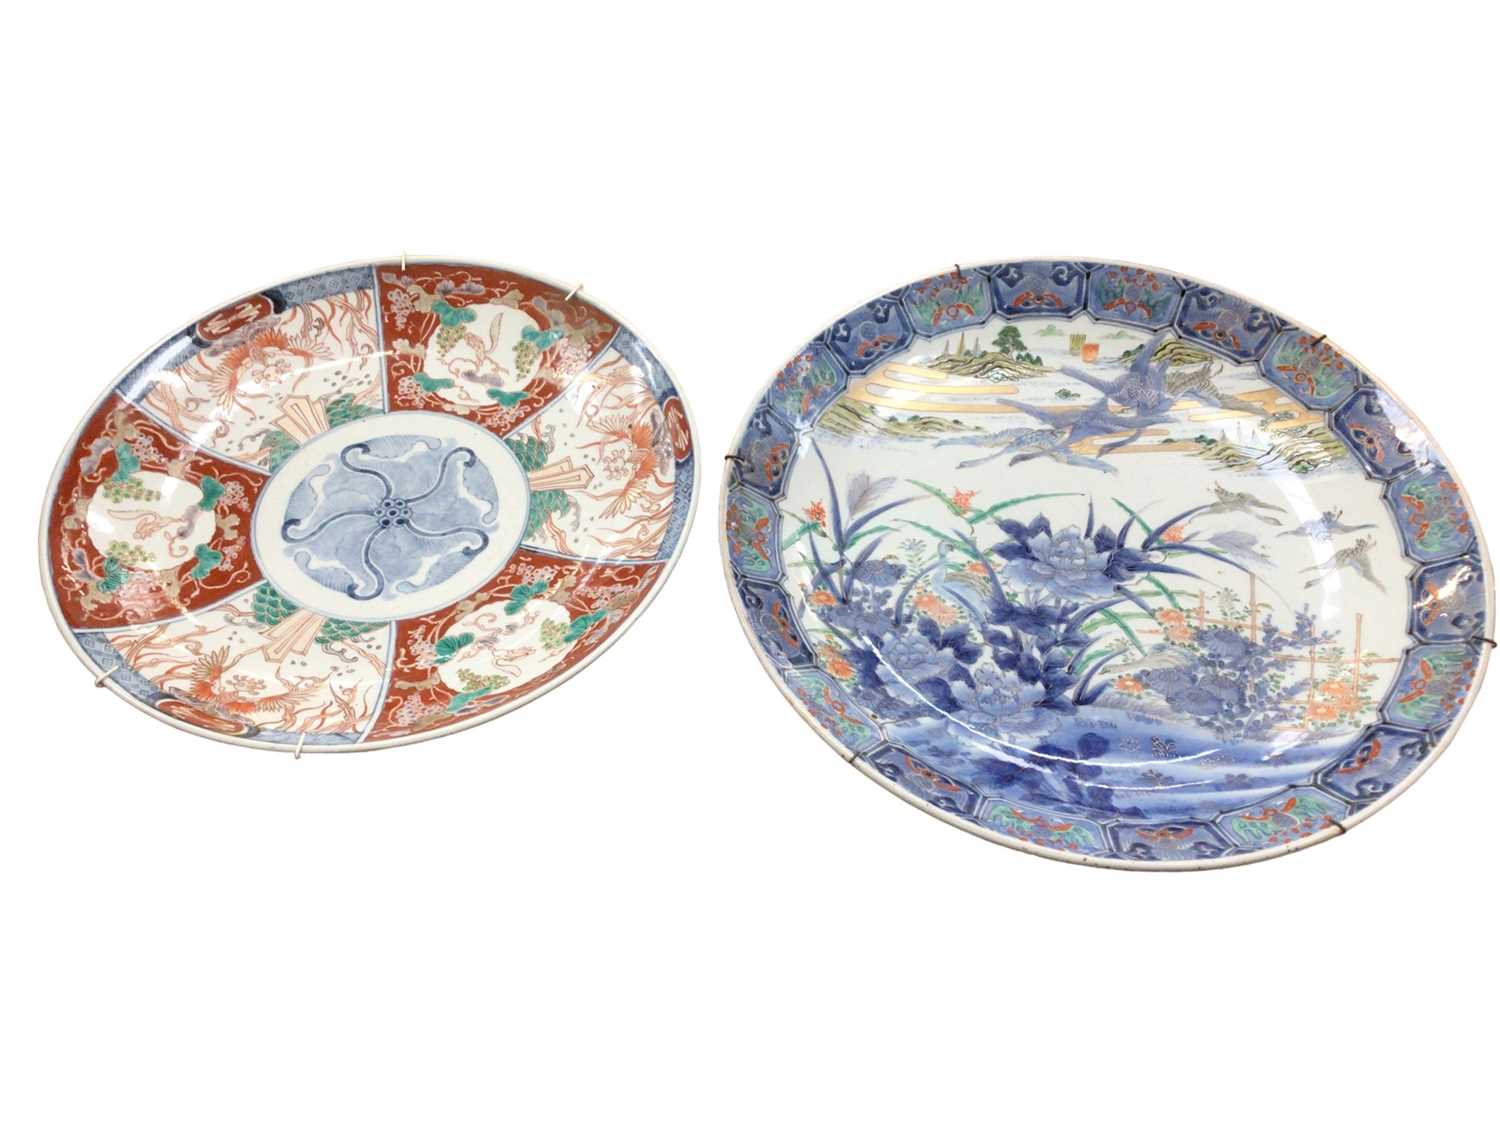 Lot 20 - Two Japanese Imari chargers